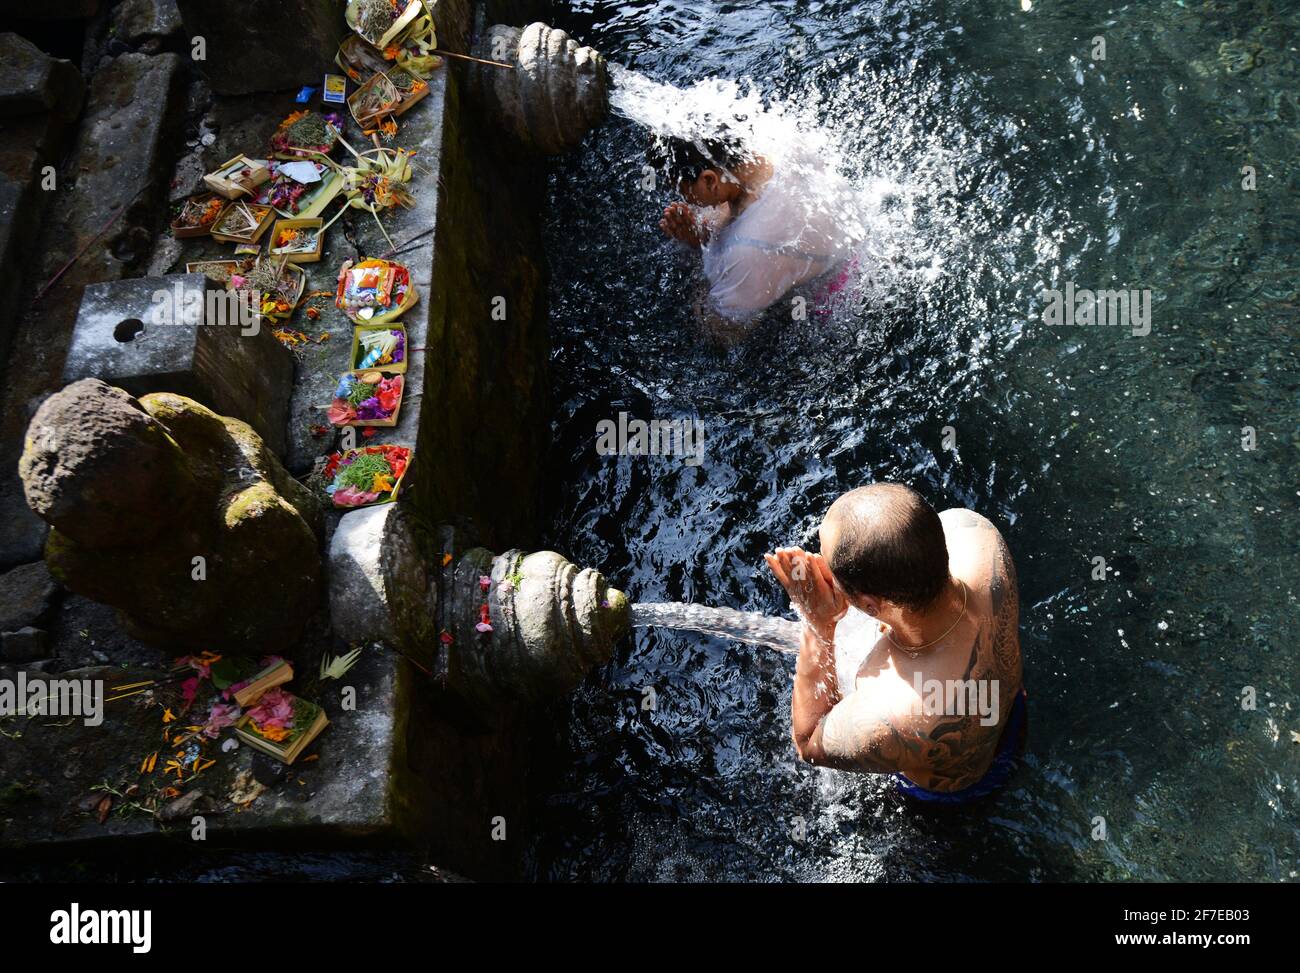 Balinese people purifying themselves at the purifying bath at the Tirta Empul temple in Bali, Indonesia. Stock Photo